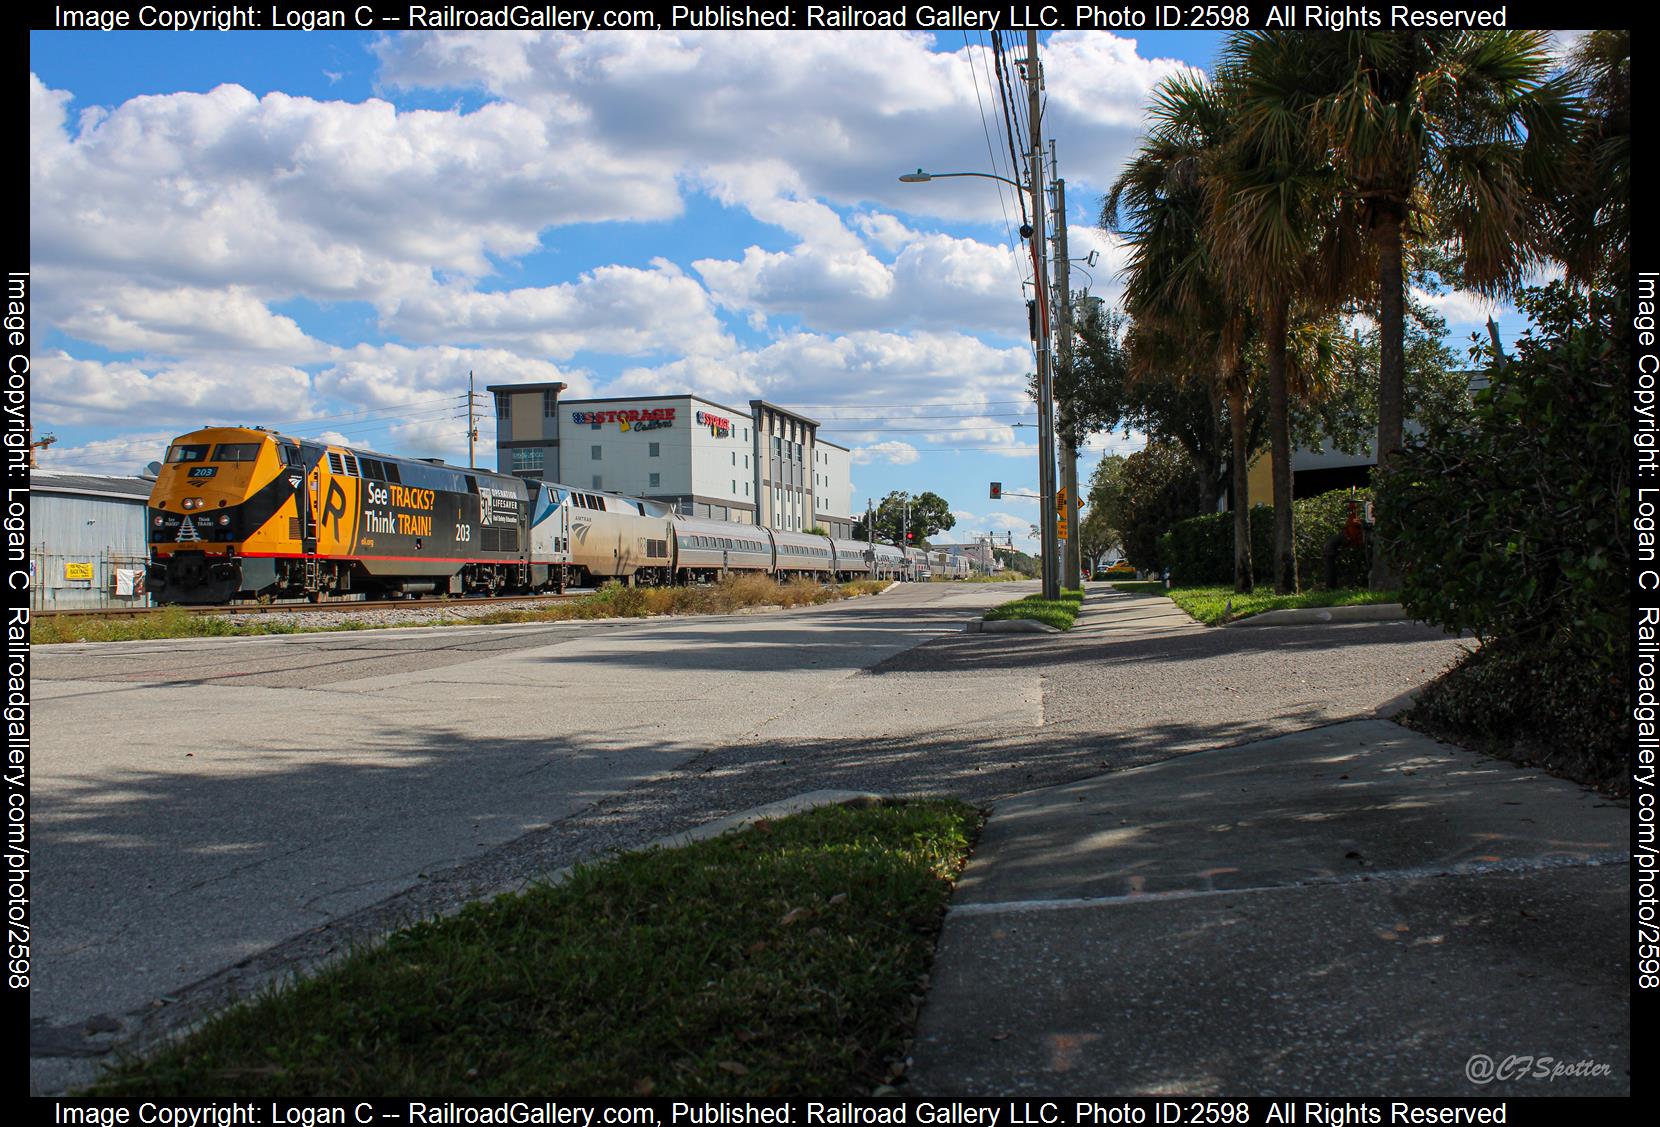 AMTK 203 AMTK 183 is a class P42DC and  is pictured in Orlando, Florida, USA.  This was taken along the CFRC on the Amtrak. Photo Copyright: Logan C uploaded to Railroad Gallery on 12/06/2023. This photograph of AMTK 203 AMTK 183 was taken on Friday, October 20, 2023. All Rights Reserved. 